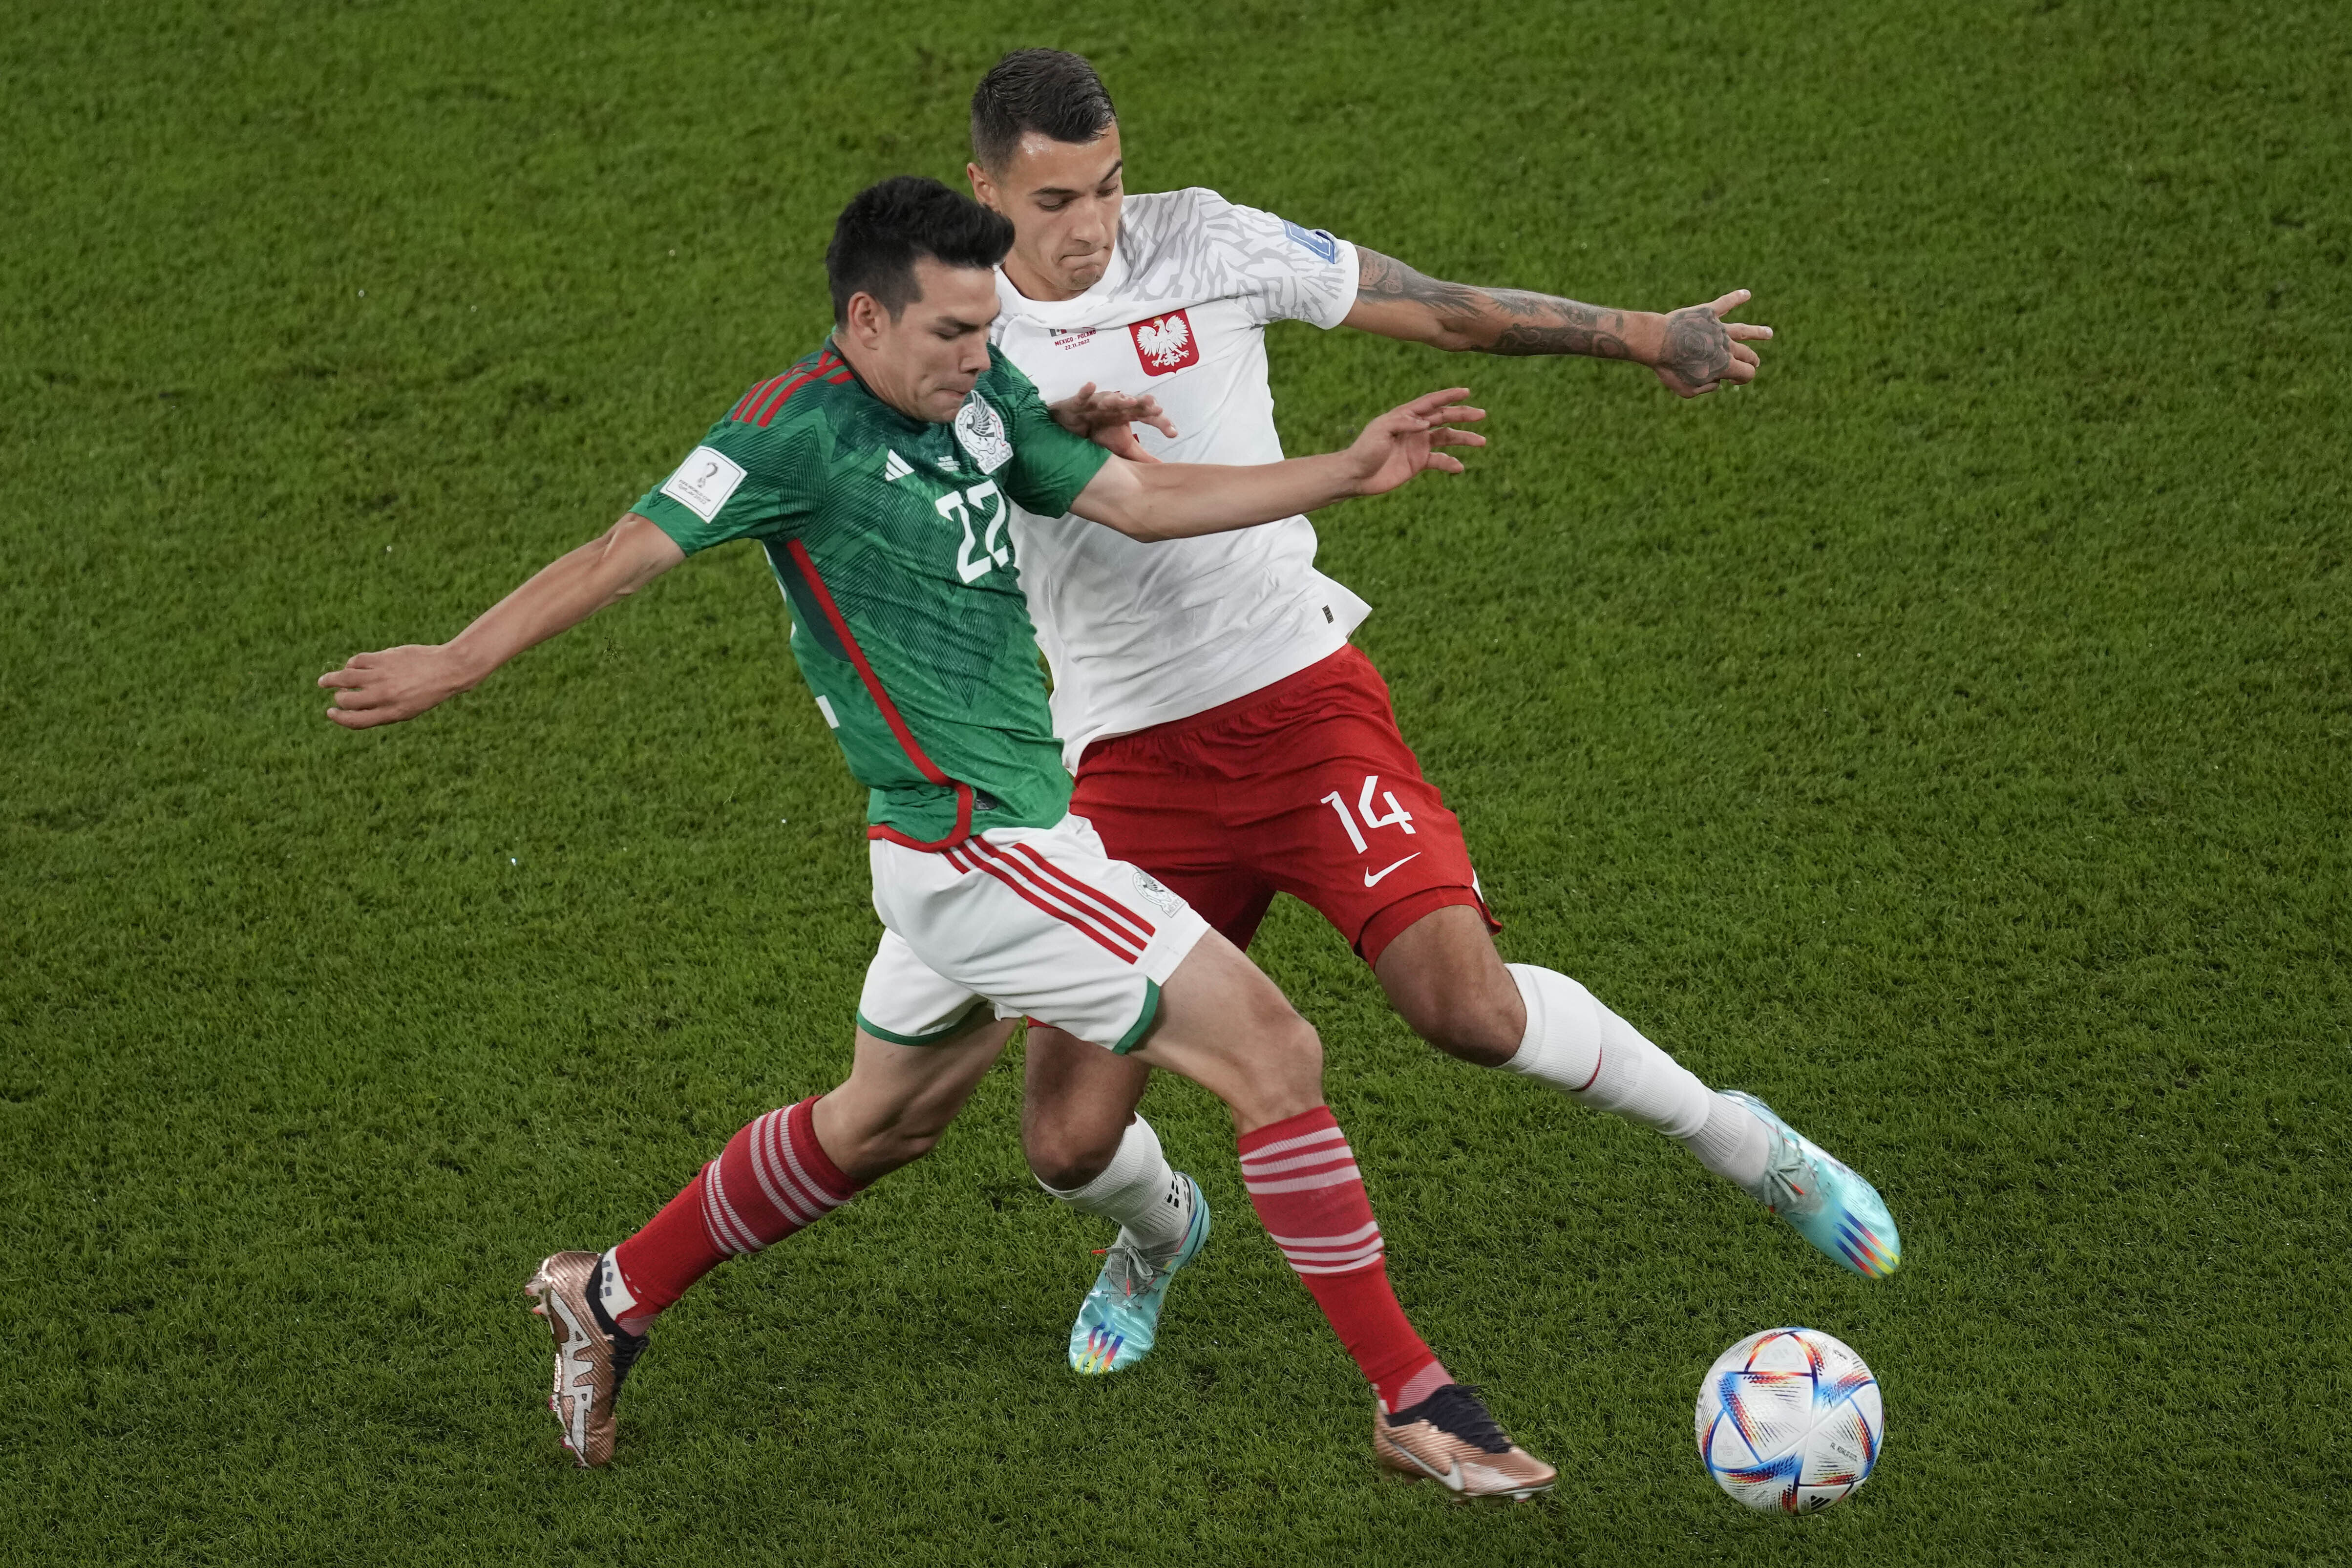 World Cup tiebreakers: Poland, Mexico fighting for Round of 16  qualification through goal, penalty tiebreakers - DraftKings Network